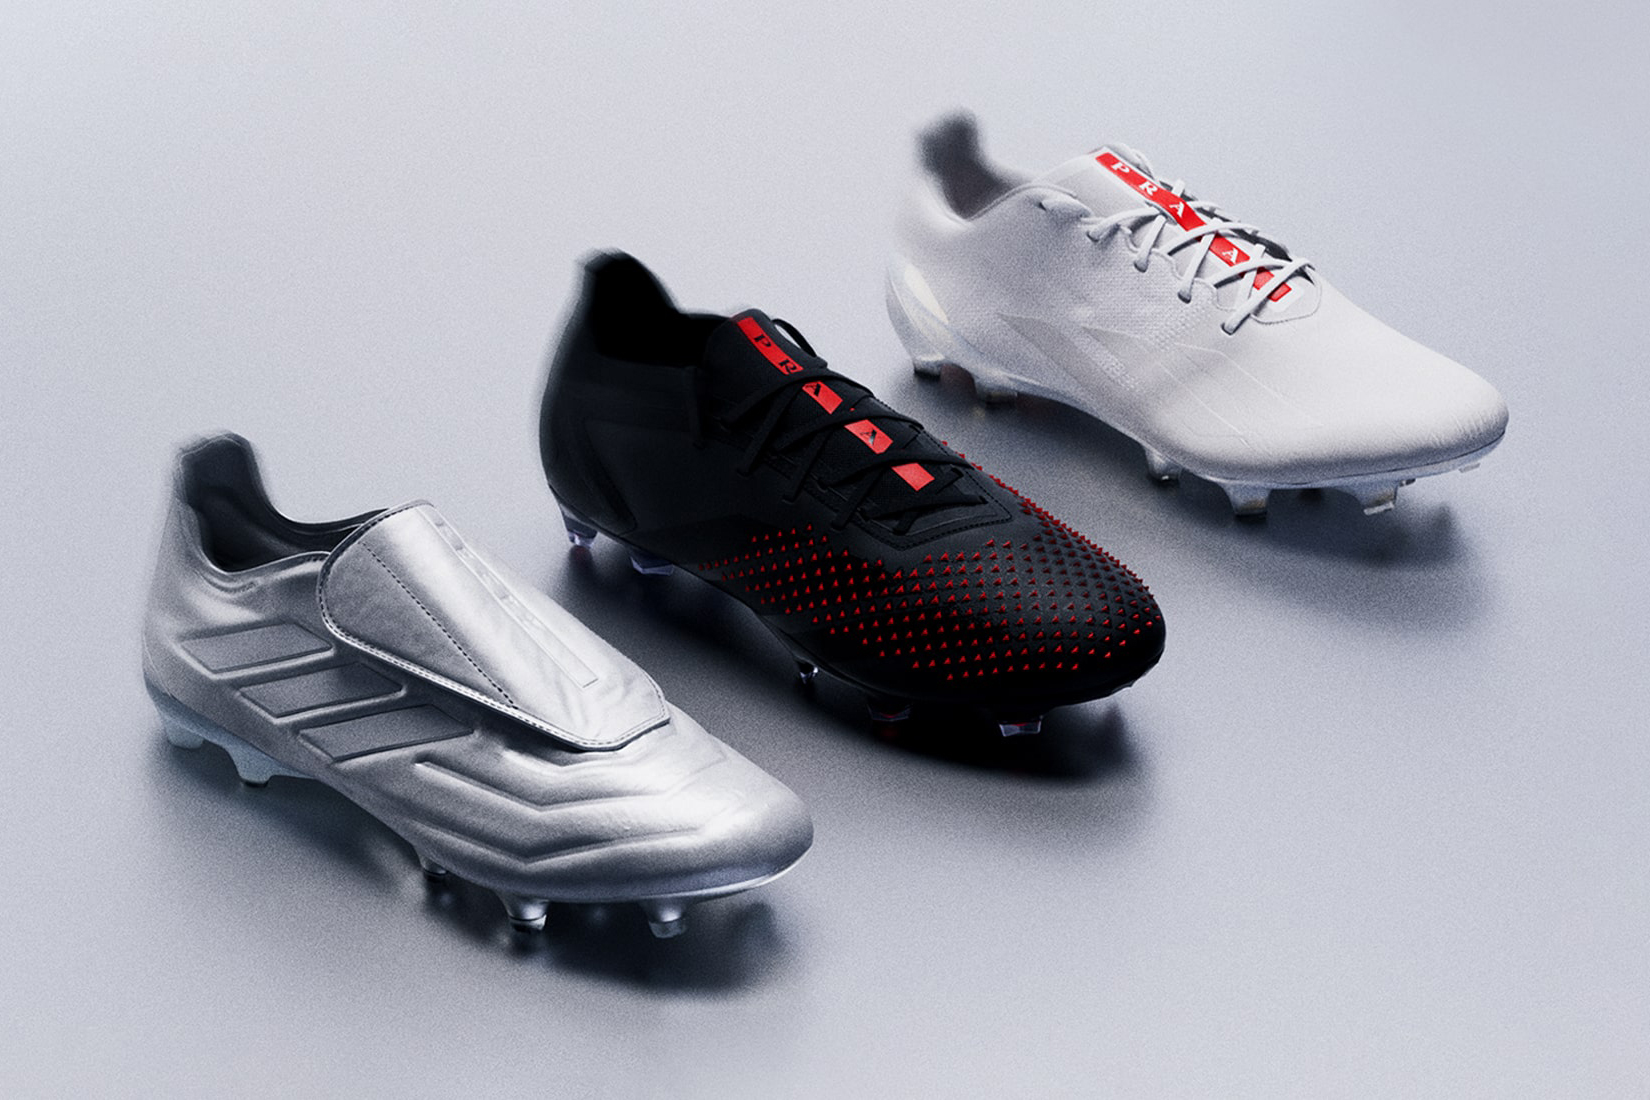 Up Your Game With the Prada x adidas Football Collection